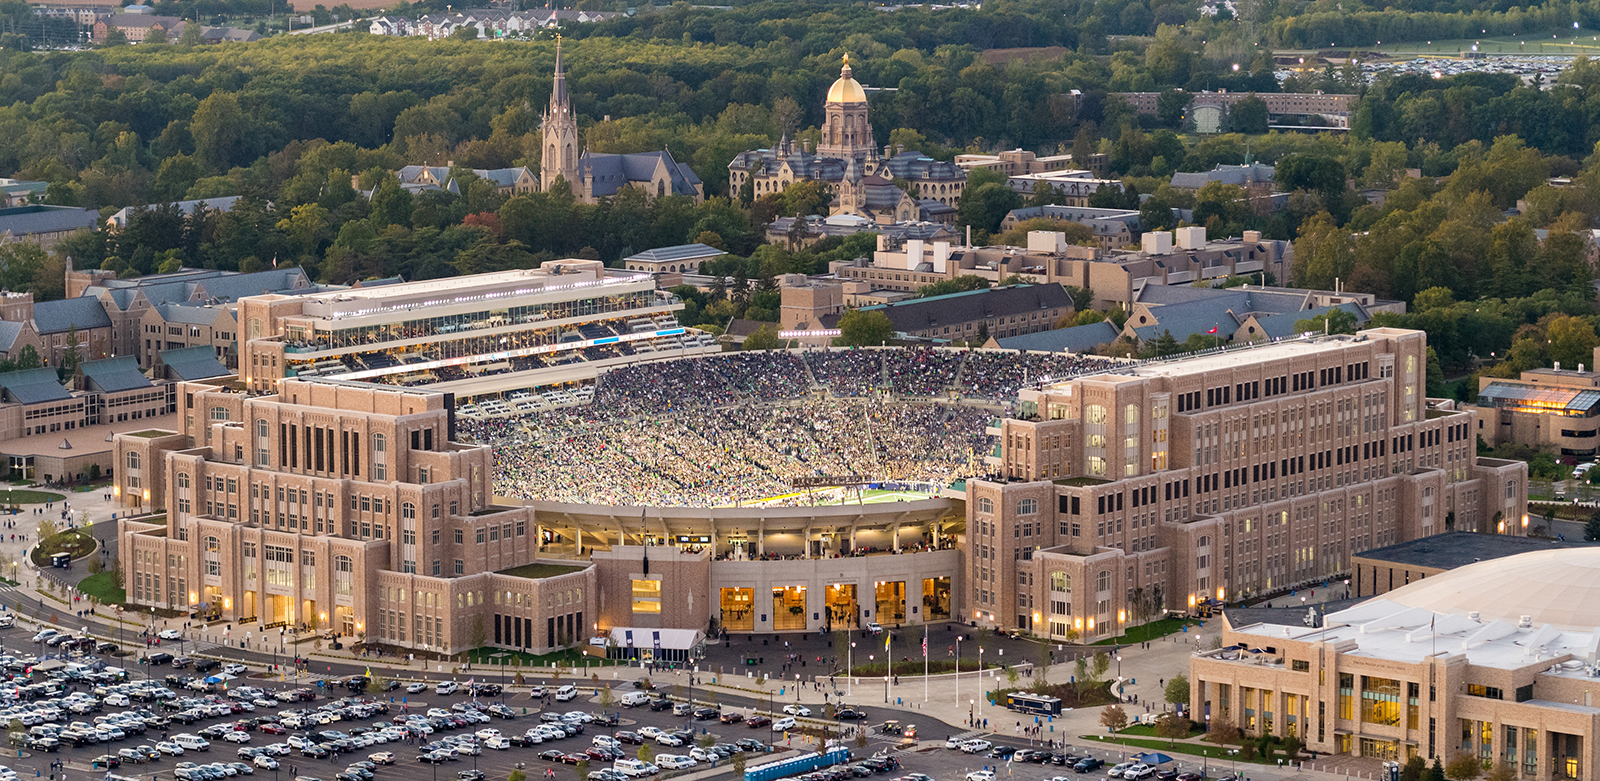 University of Notre Dame, Campus Crossroads Project